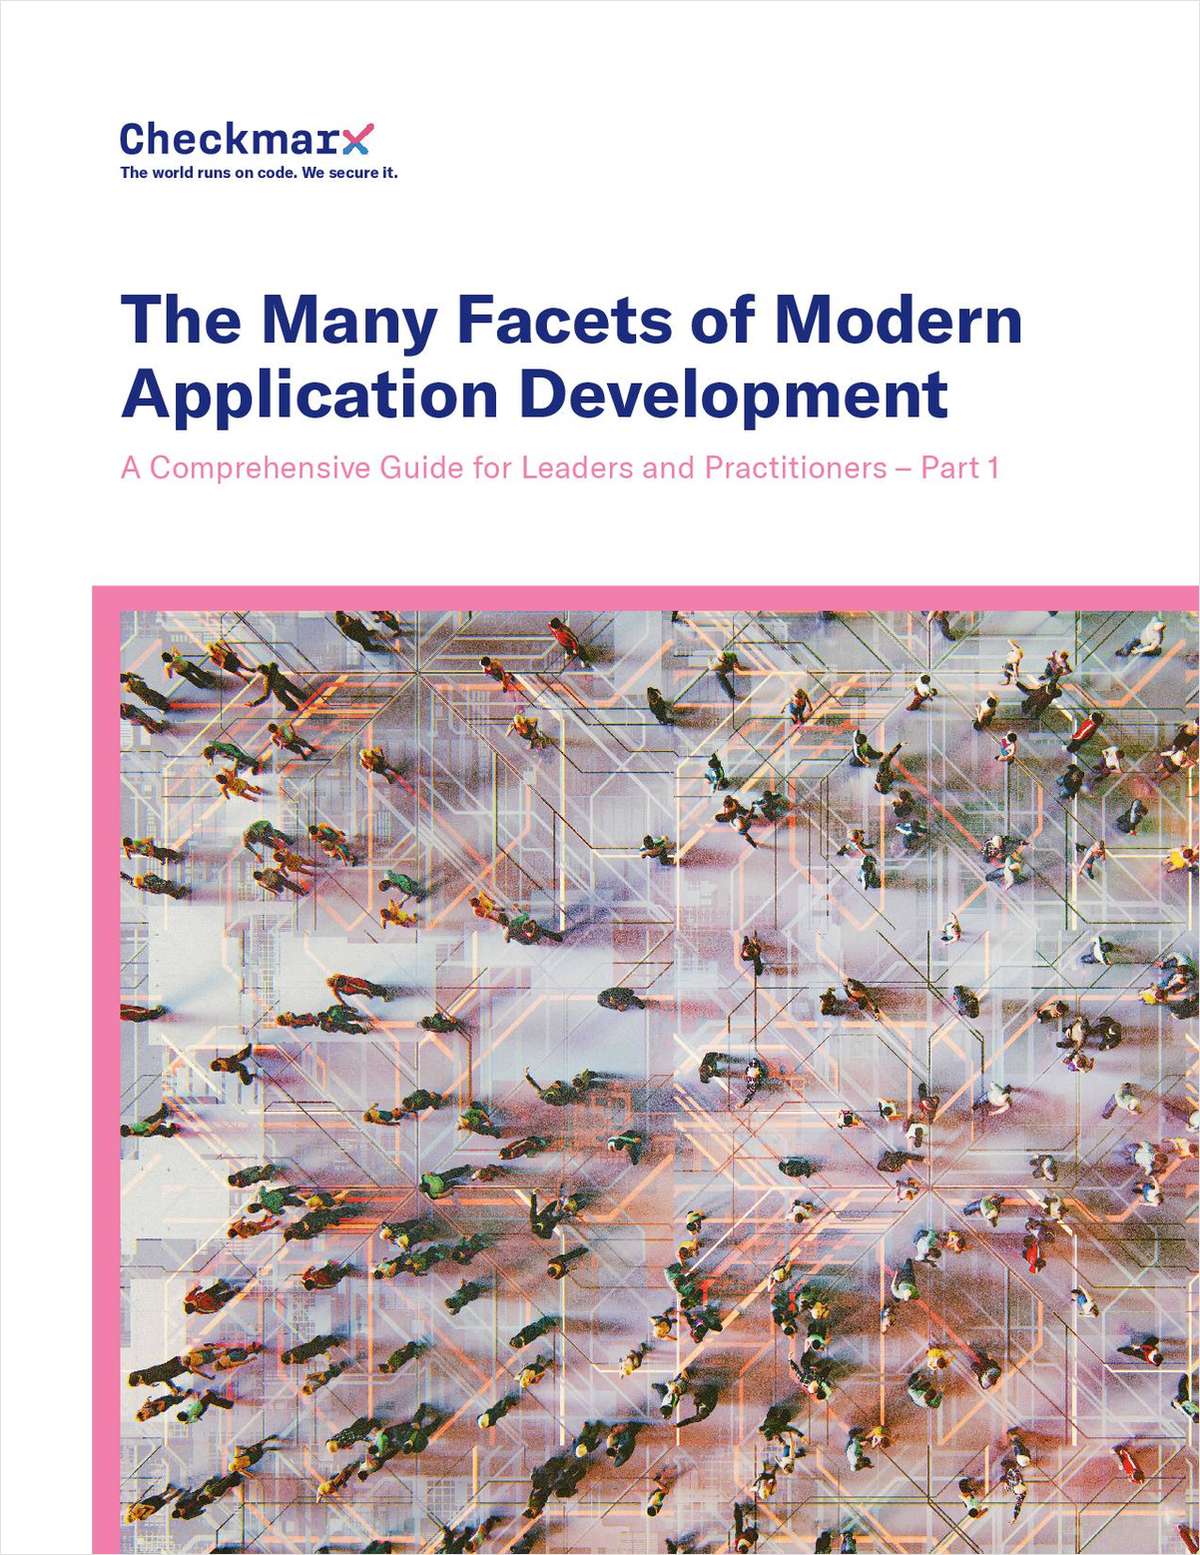 The Many Facets of Modern Application Development